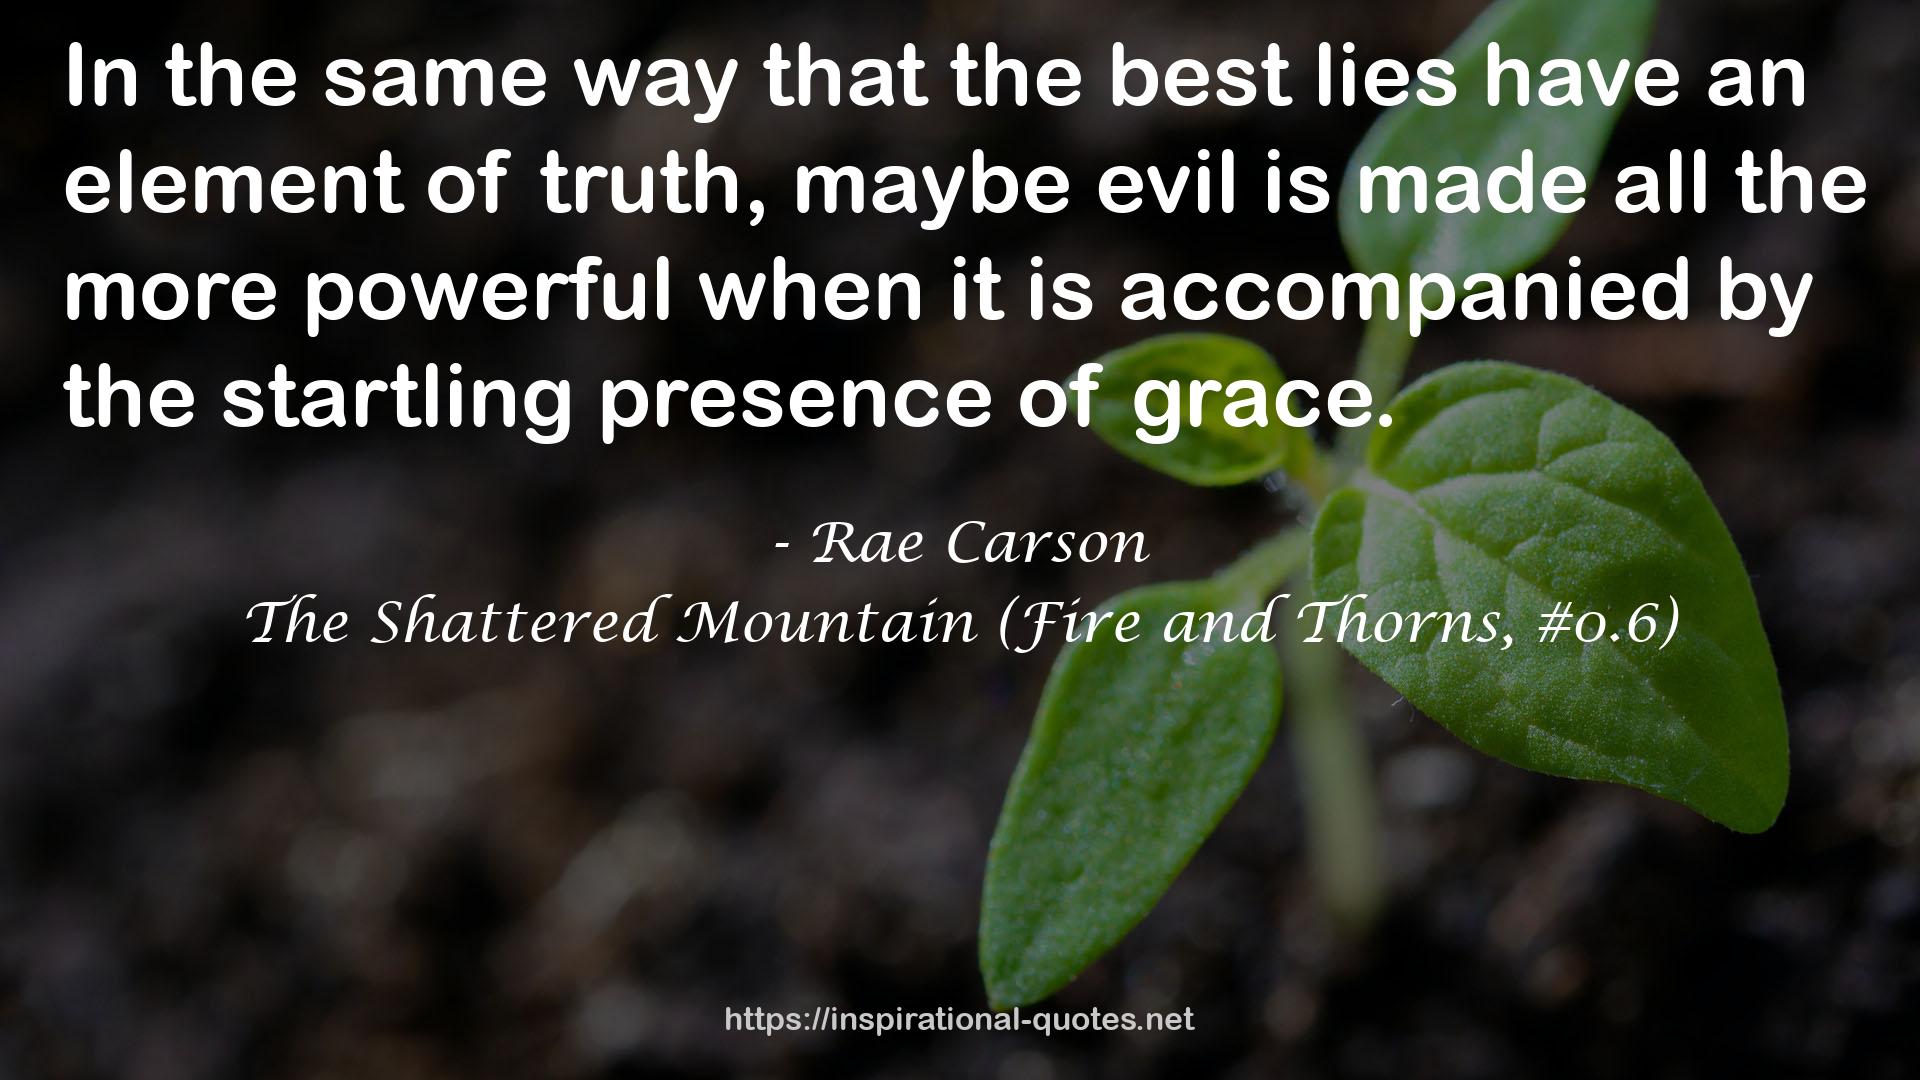 The Shattered Mountain (Fire and Thorns, #0.6) QUOTES